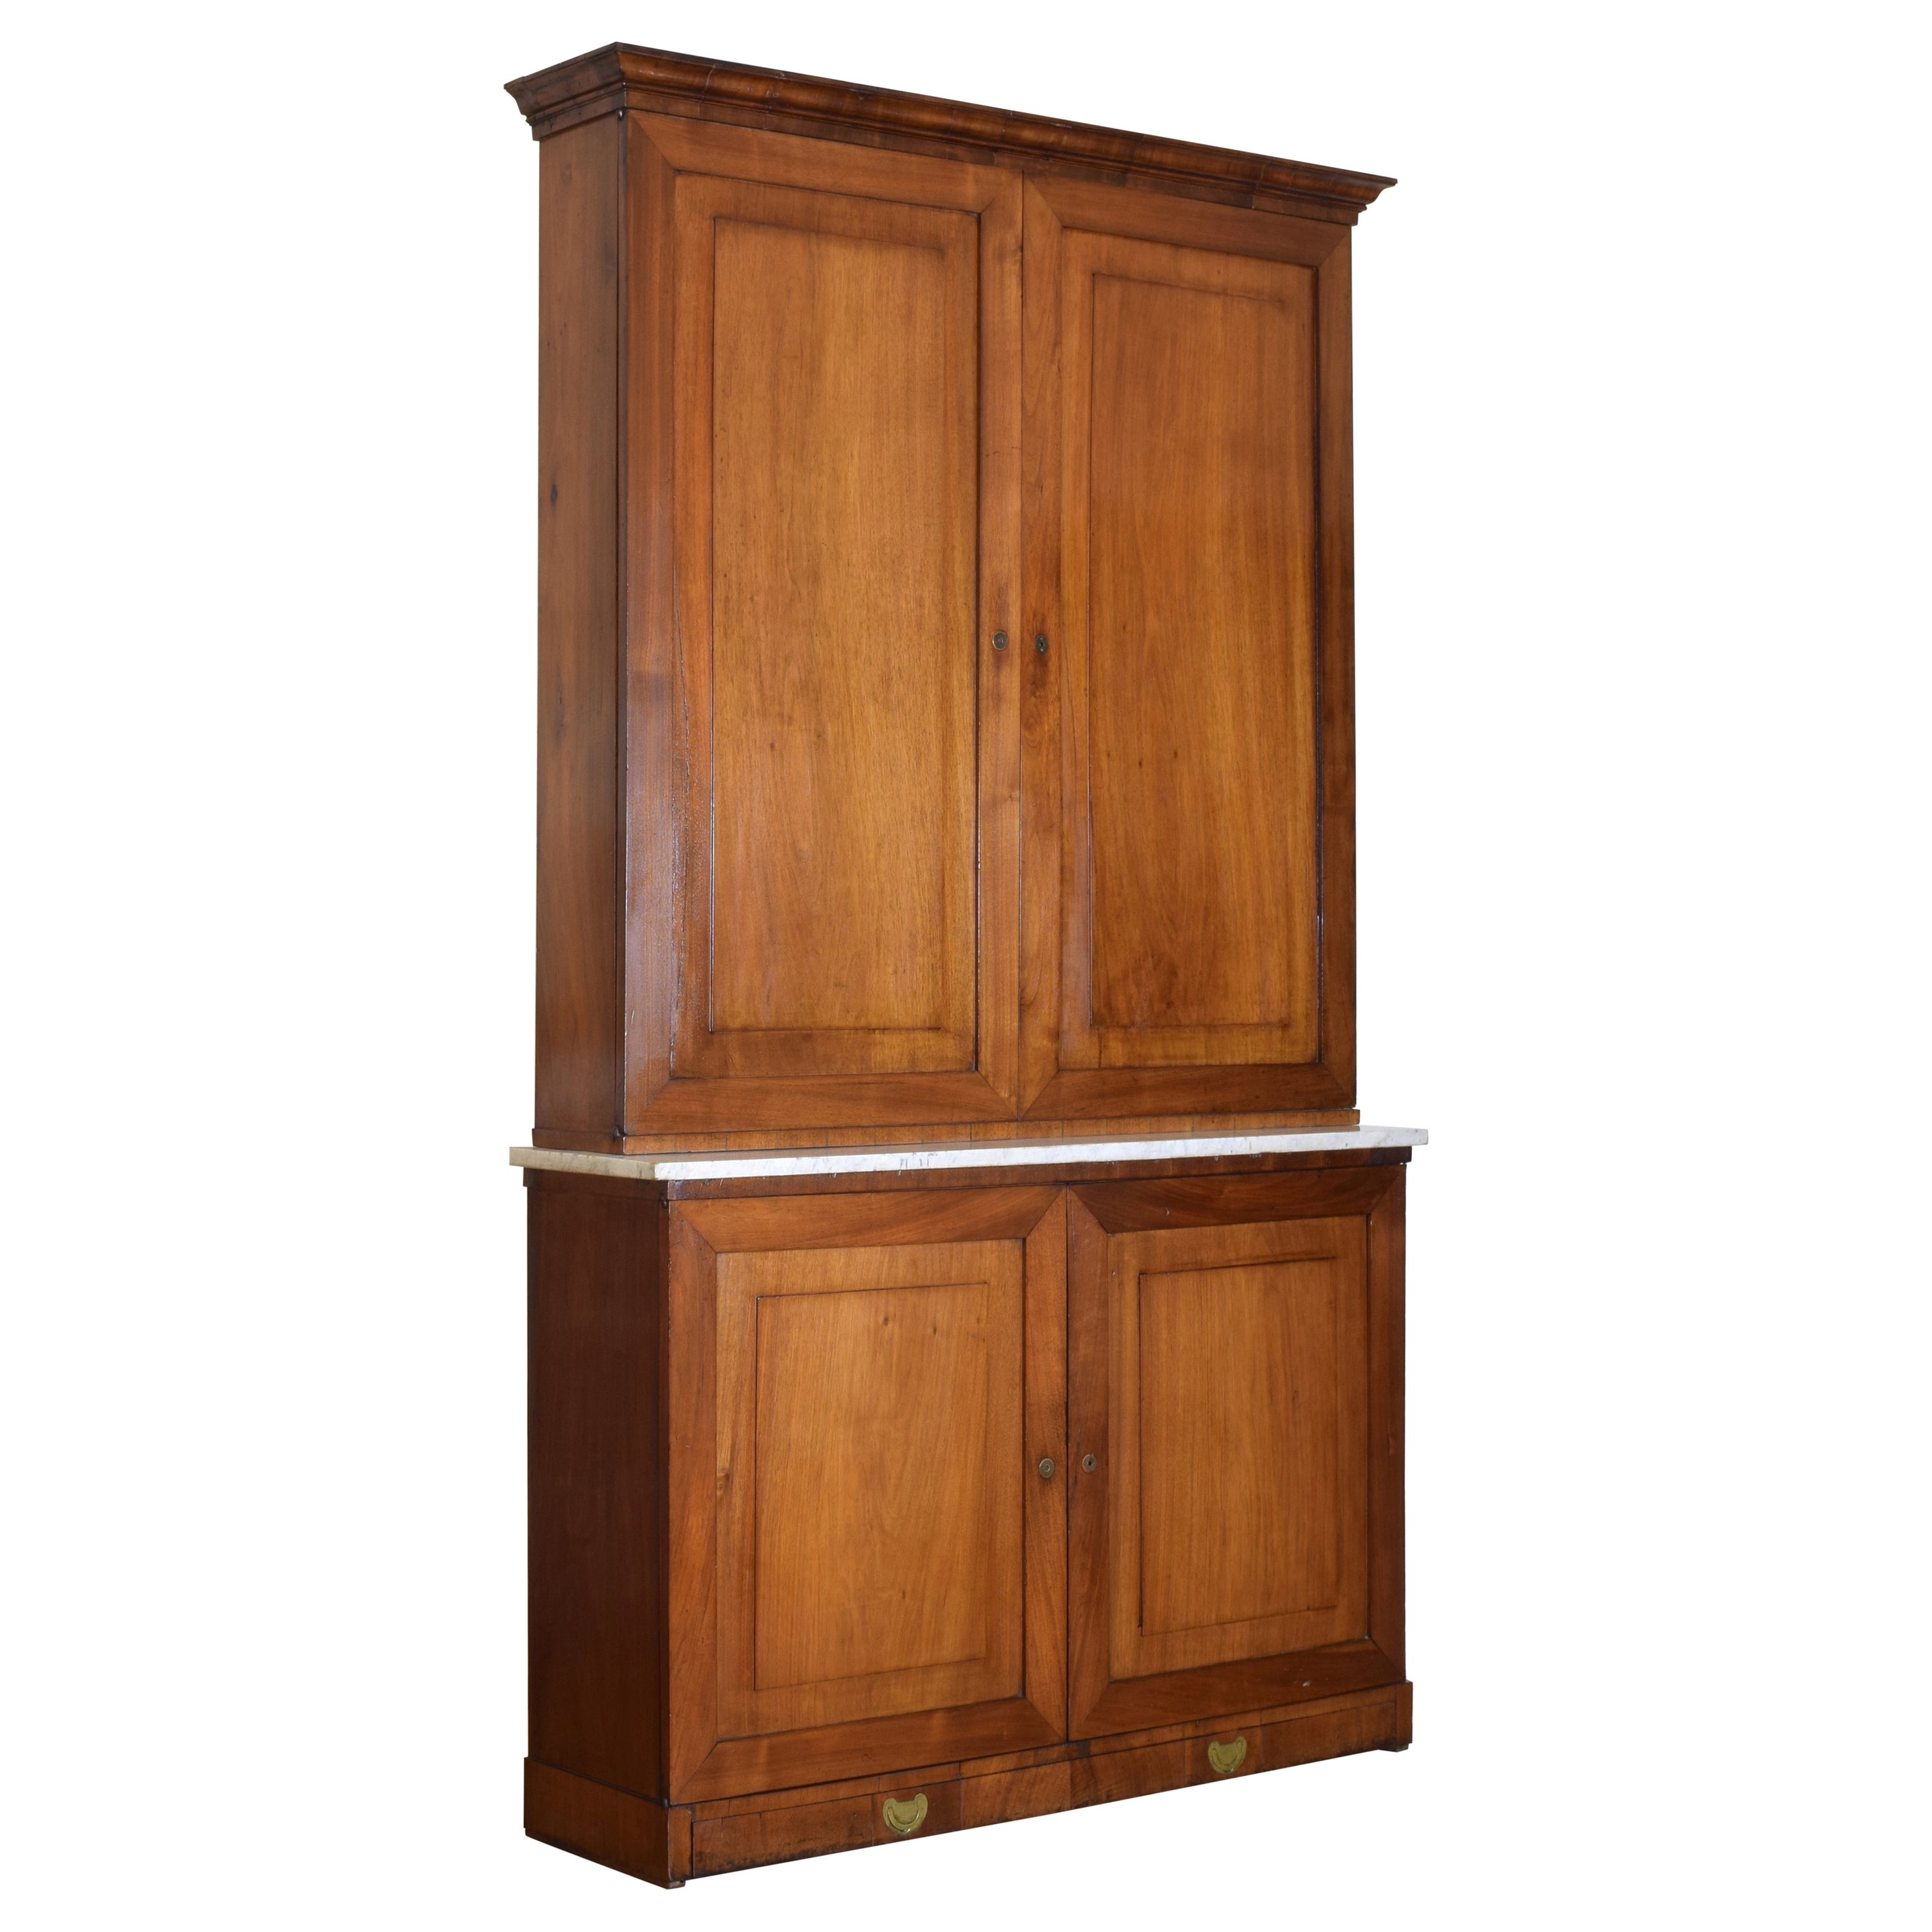 Italian Late Neoclassic Walnut & Marble 2-Piece Altar Cabinet, Mid 19th Century For Sale